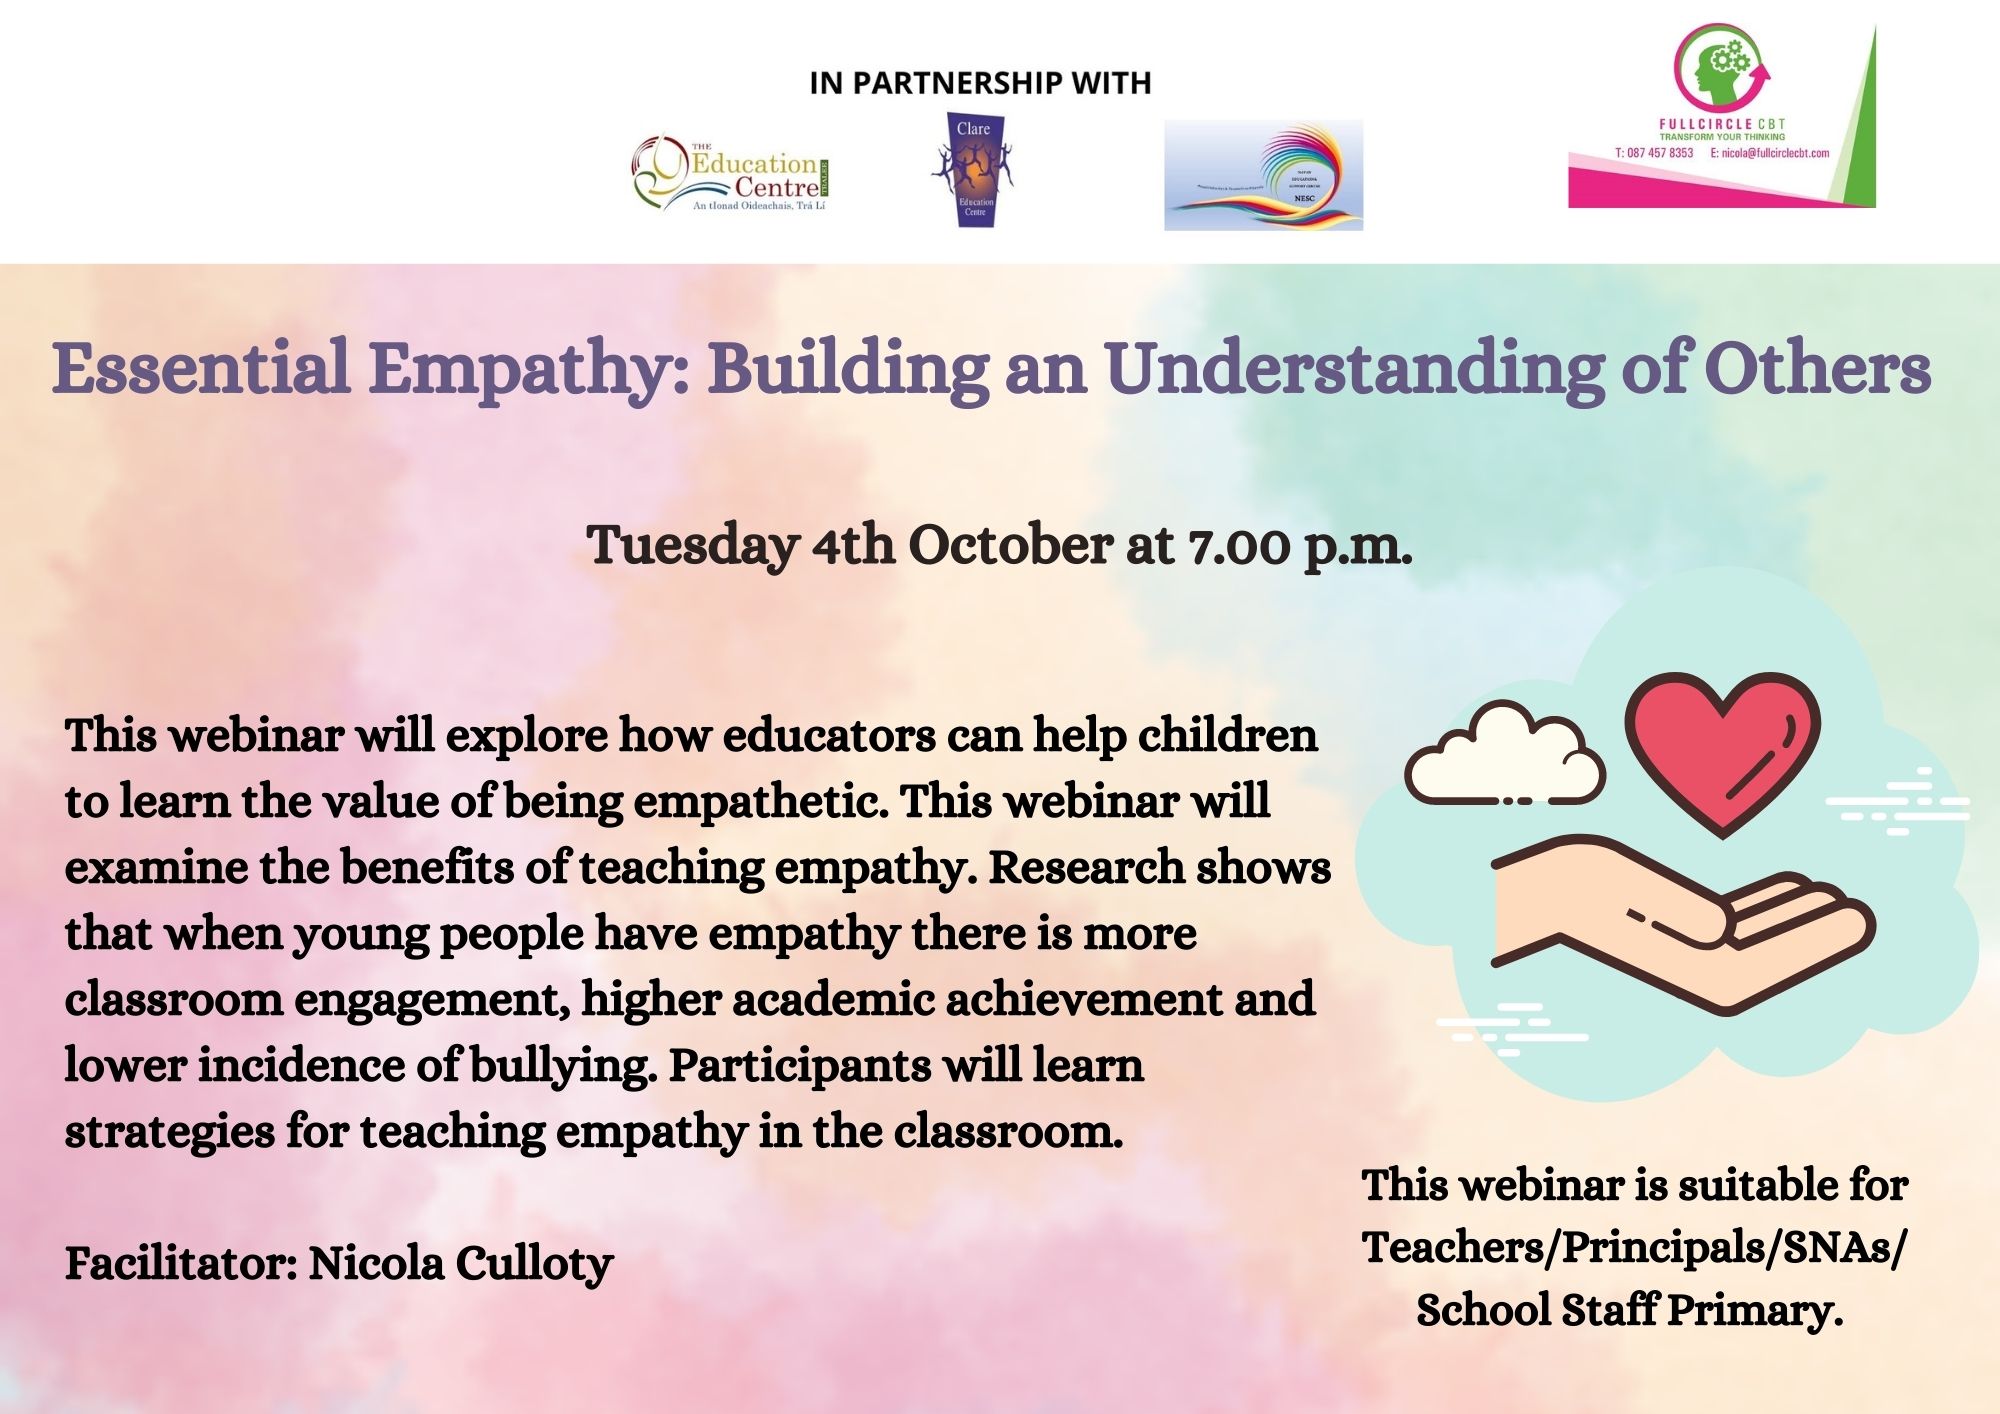 AUT22-154 Essential Empathy: Building an Understanding of Others 